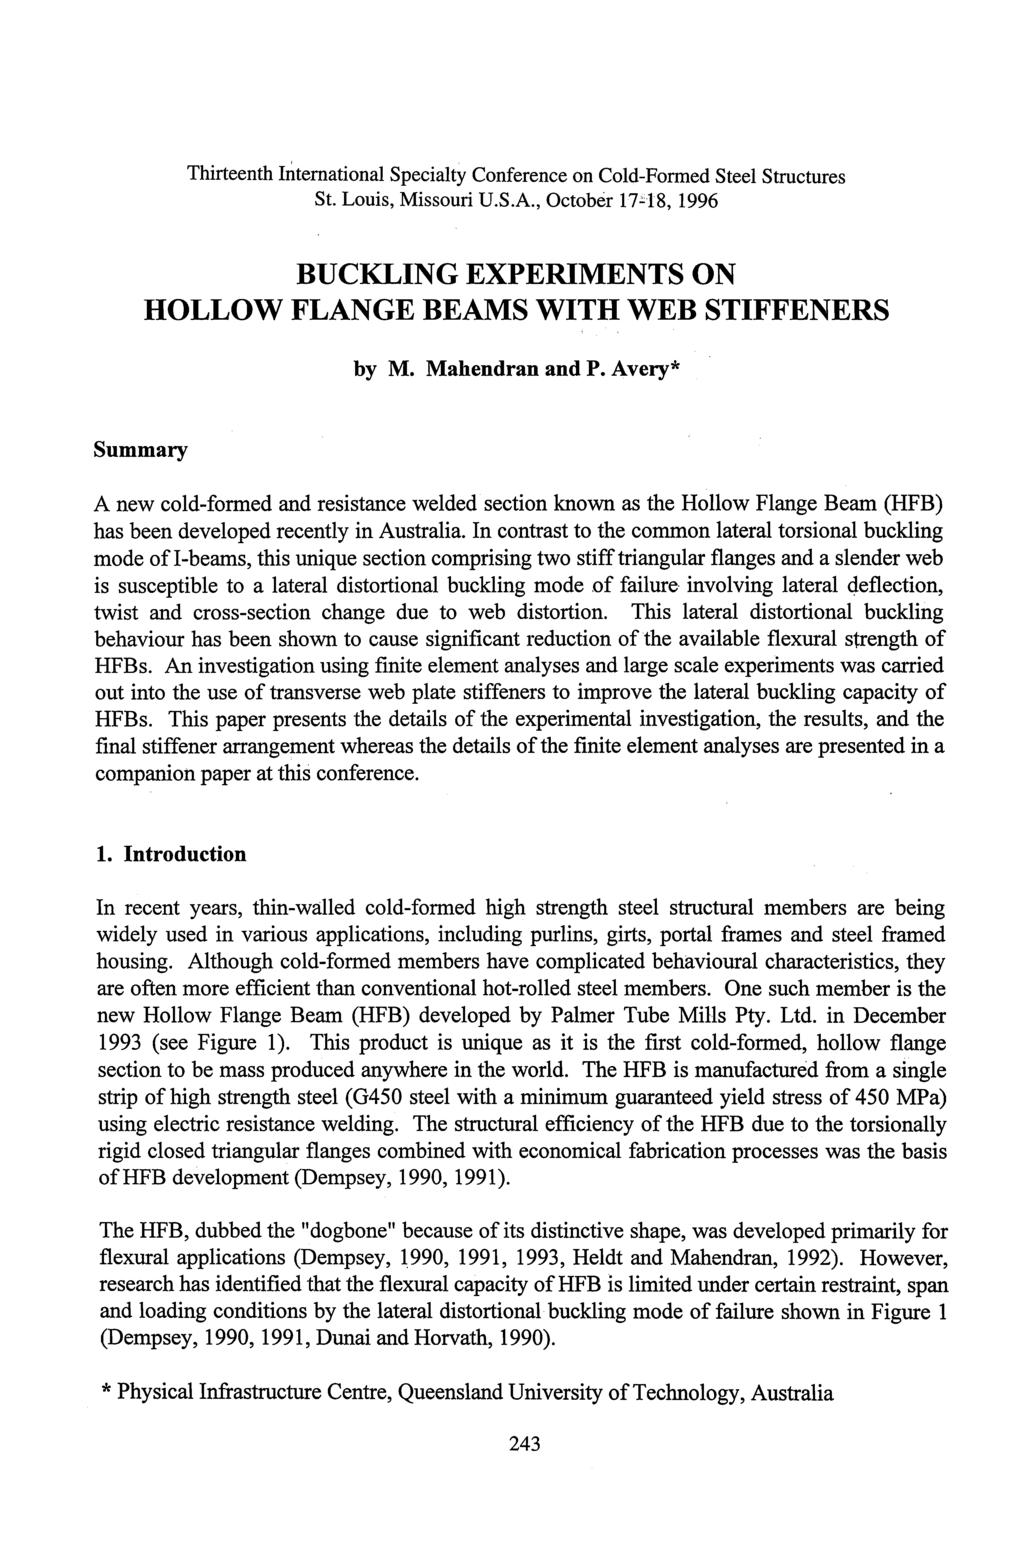 Thirteenth International Specialty Conference on Cold-Formed Steel Structures St. Louis, Missouri U.S.A., October 17e18, 1996 BUCKLING XPRIMNTS ON HOLLOW FLANG BAMS WITH WB STIFFNRS by M.